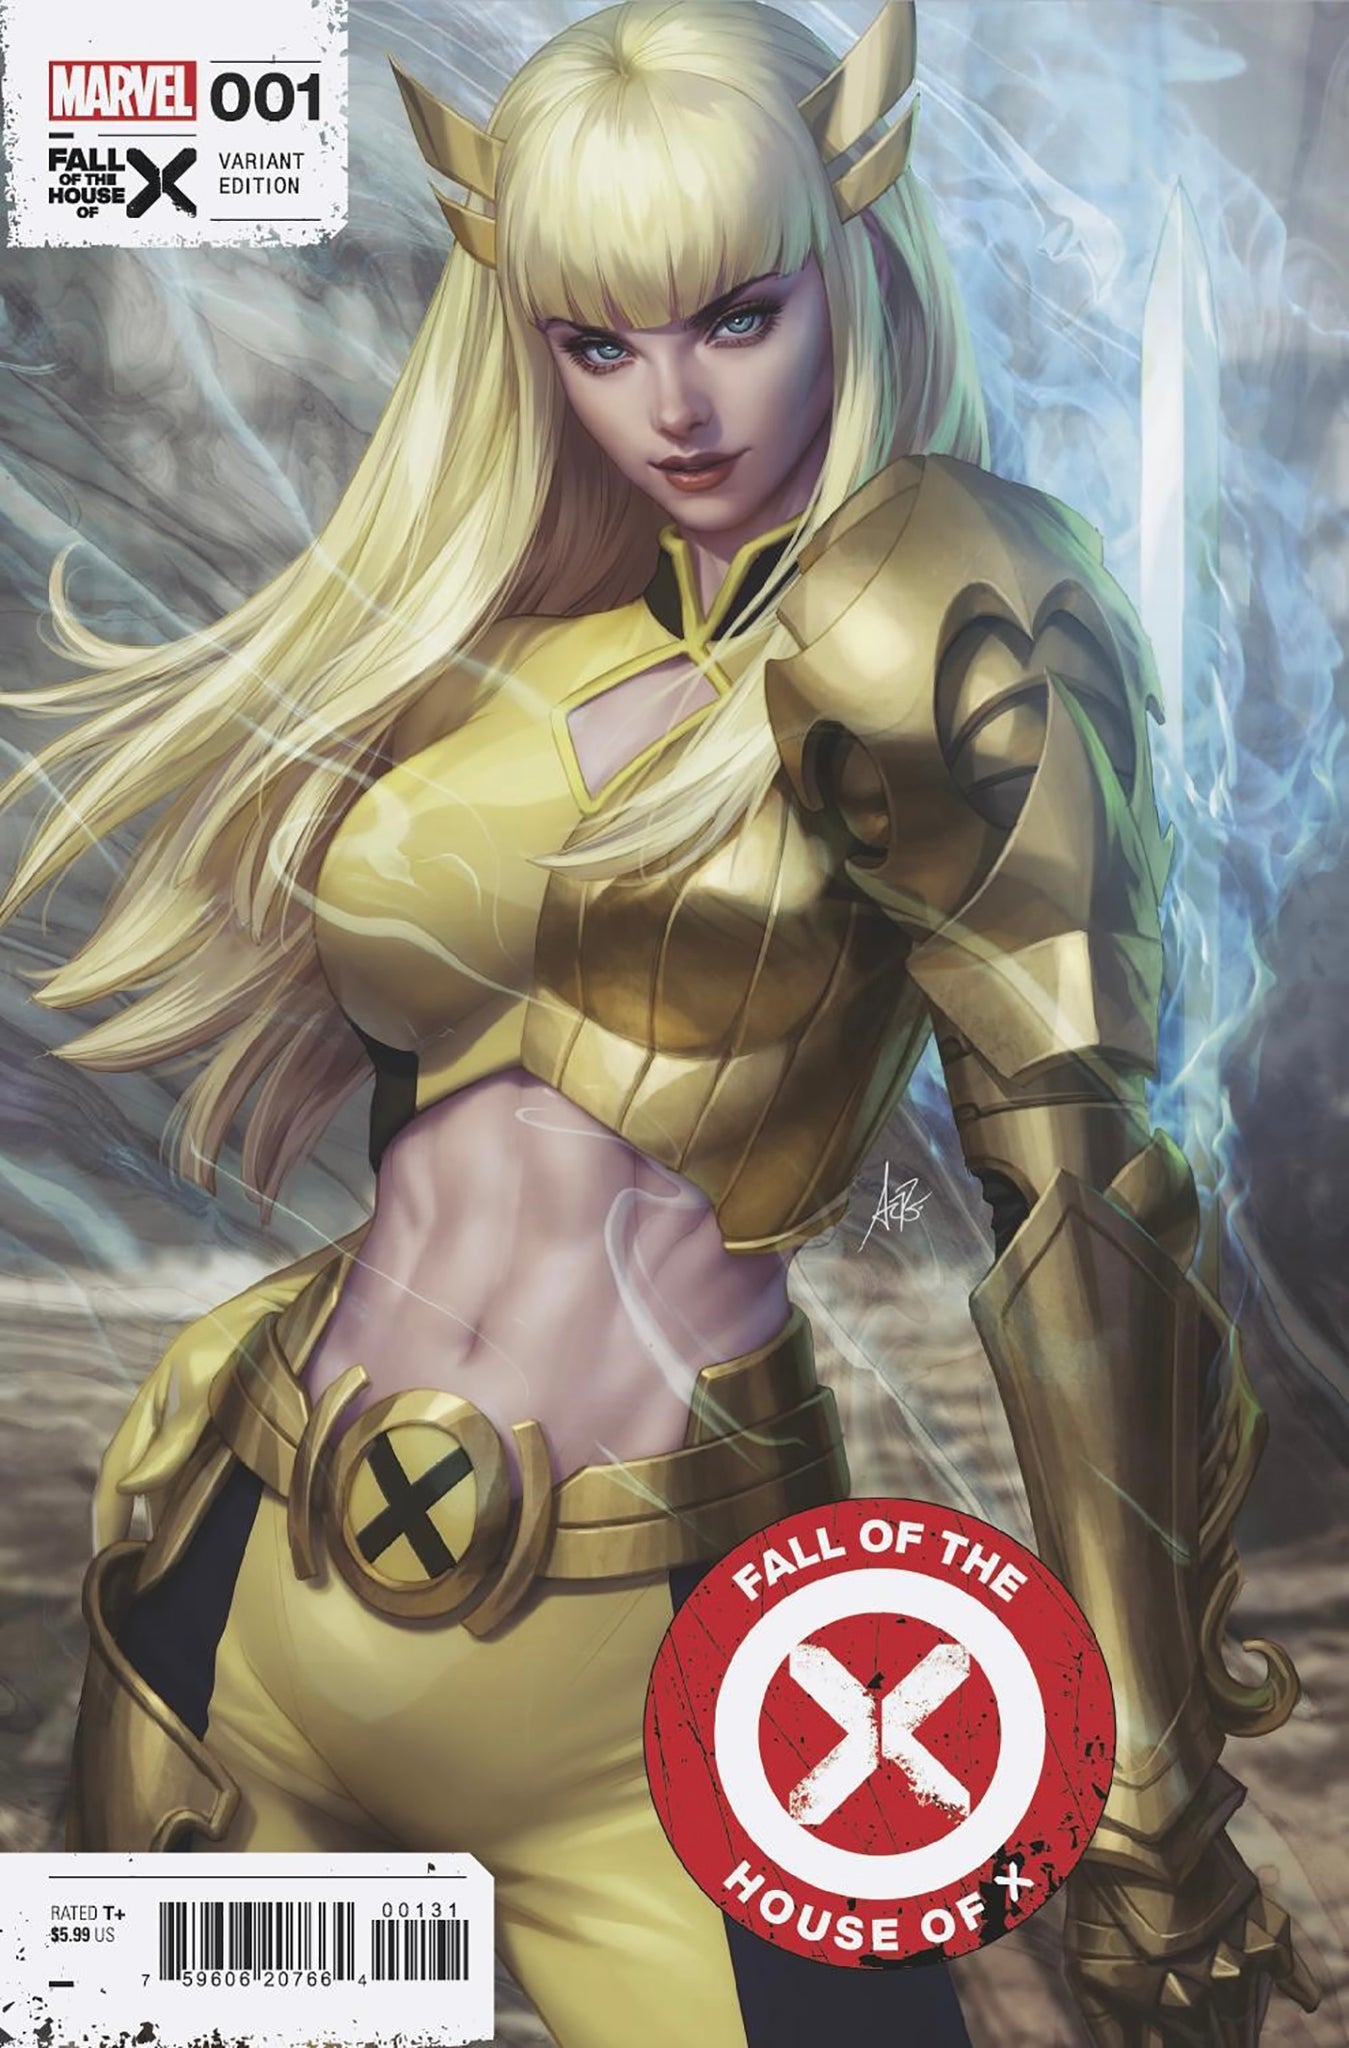 FALL OF THE HOUSE OF X #1 STANLEY ARTGERM LAU MAGIK Variant